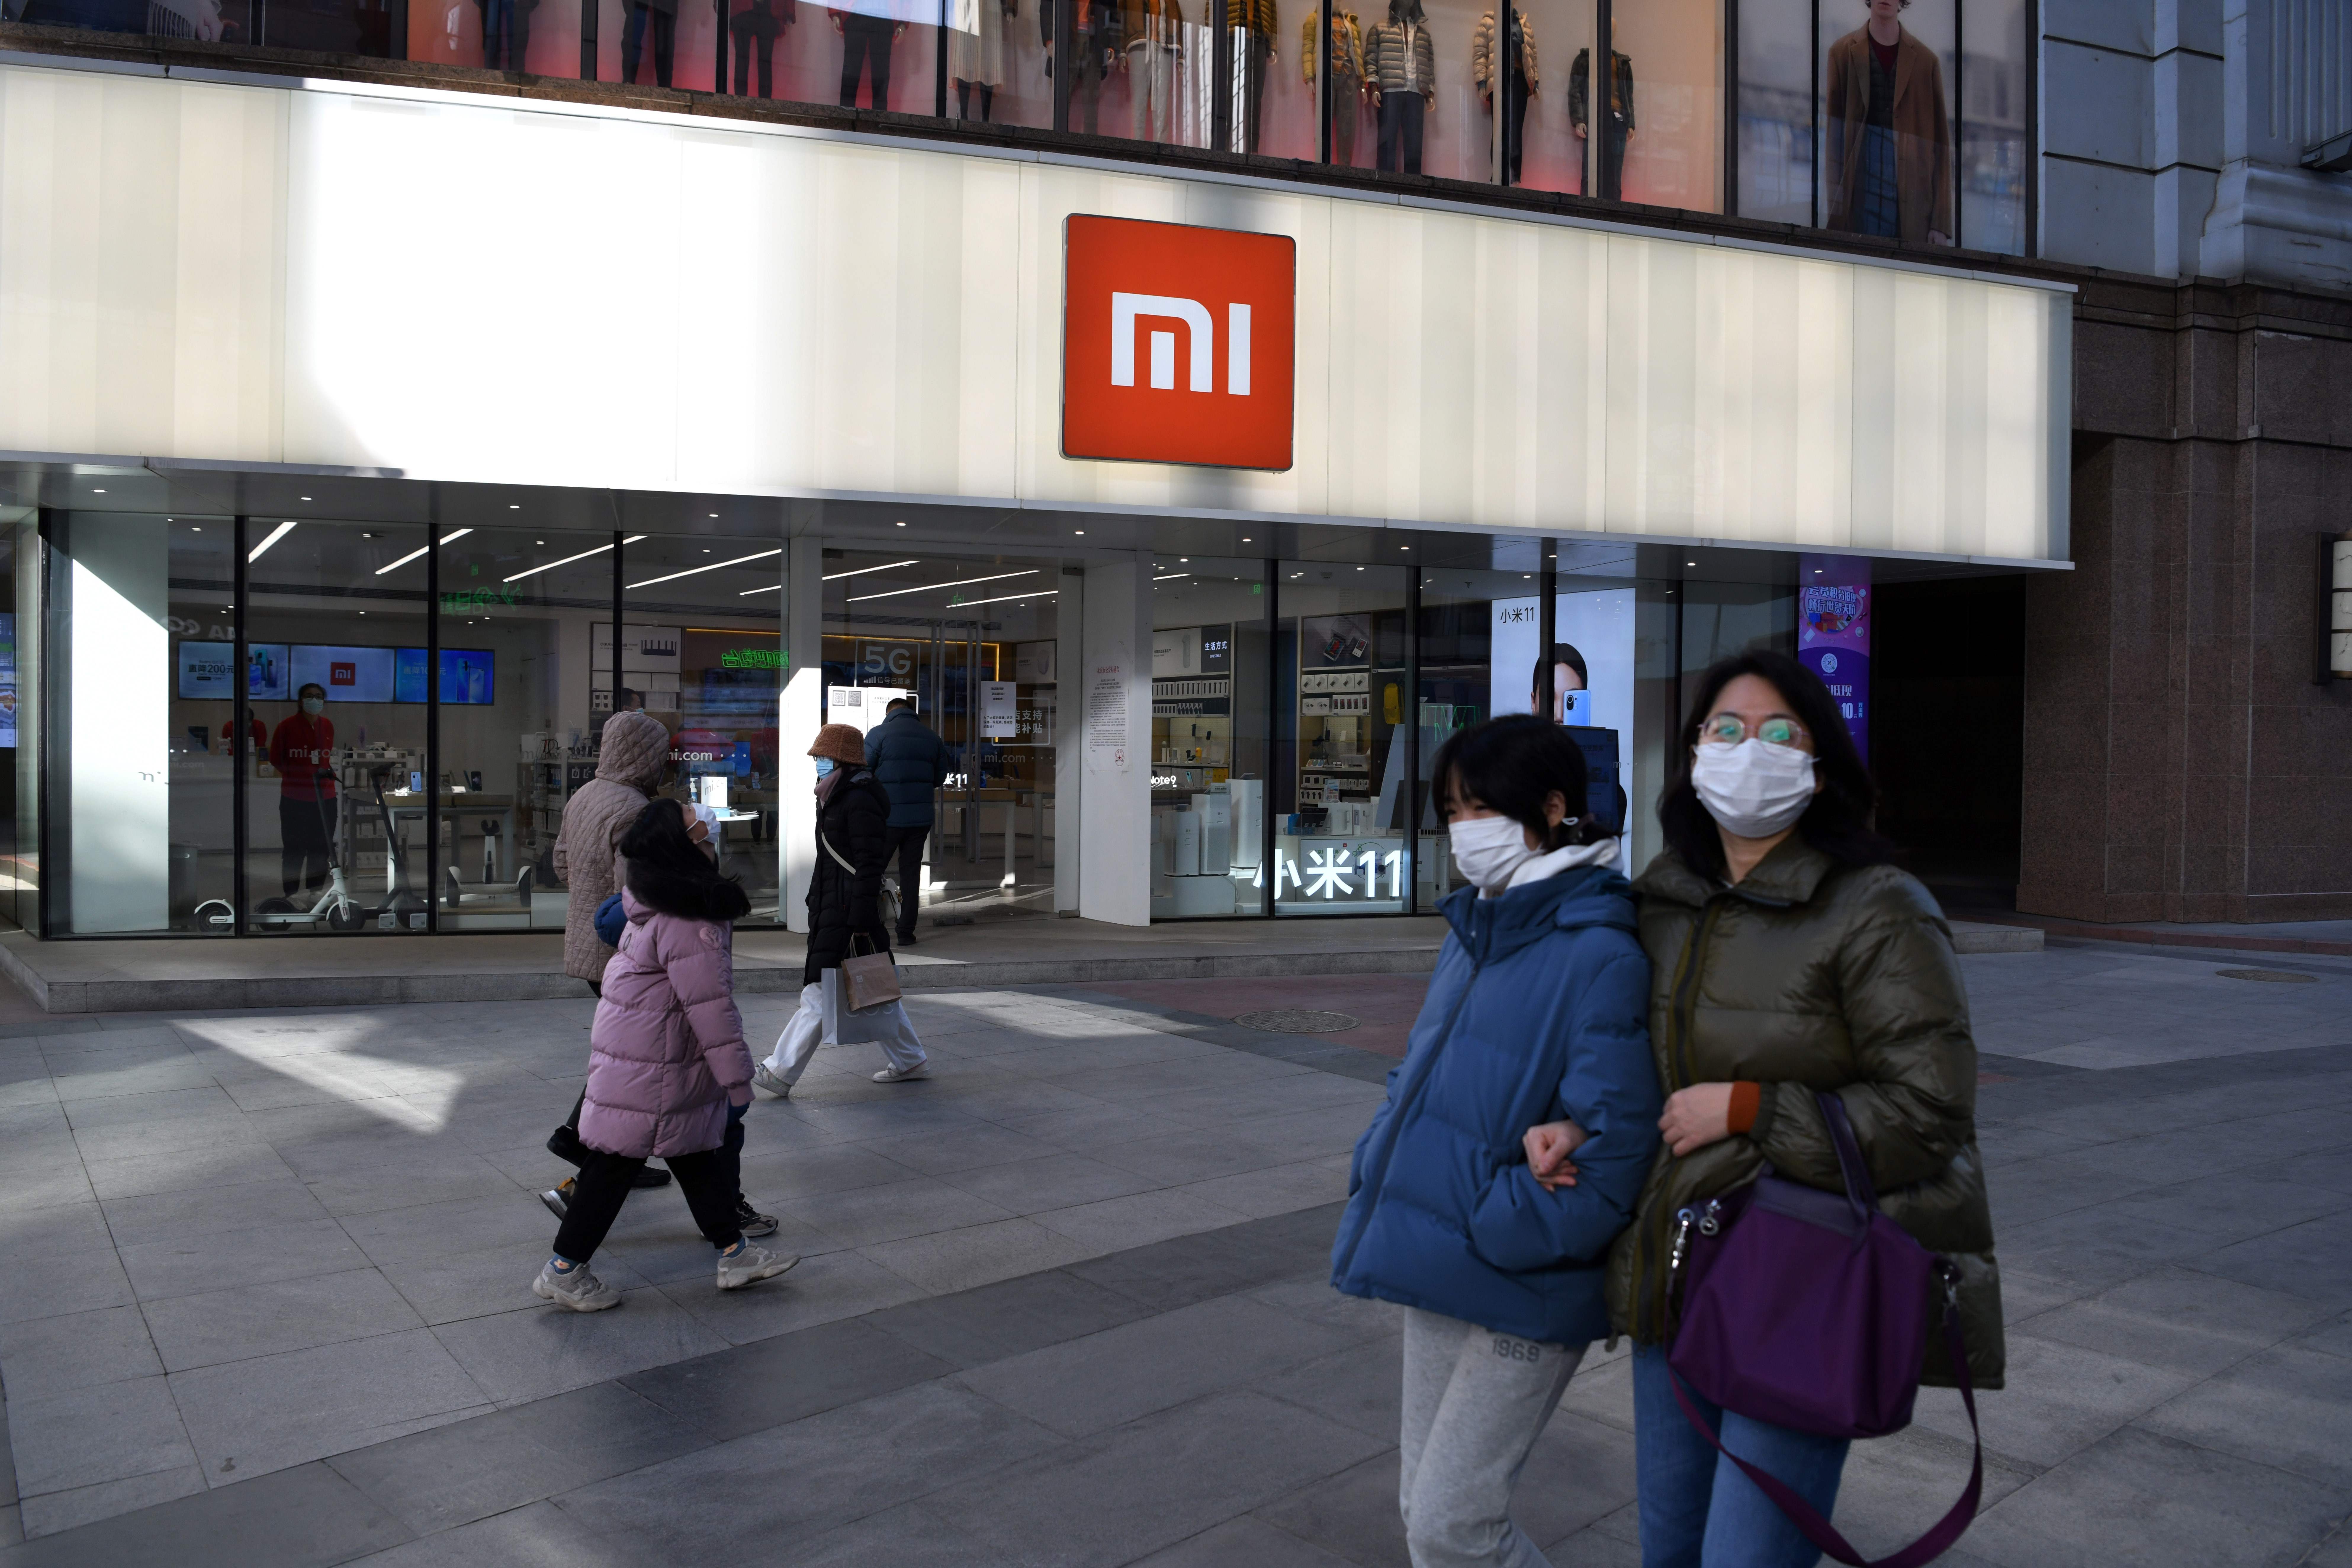 Xiaomi shares are up 10% after the US judge blocked restrictions from the Trump era